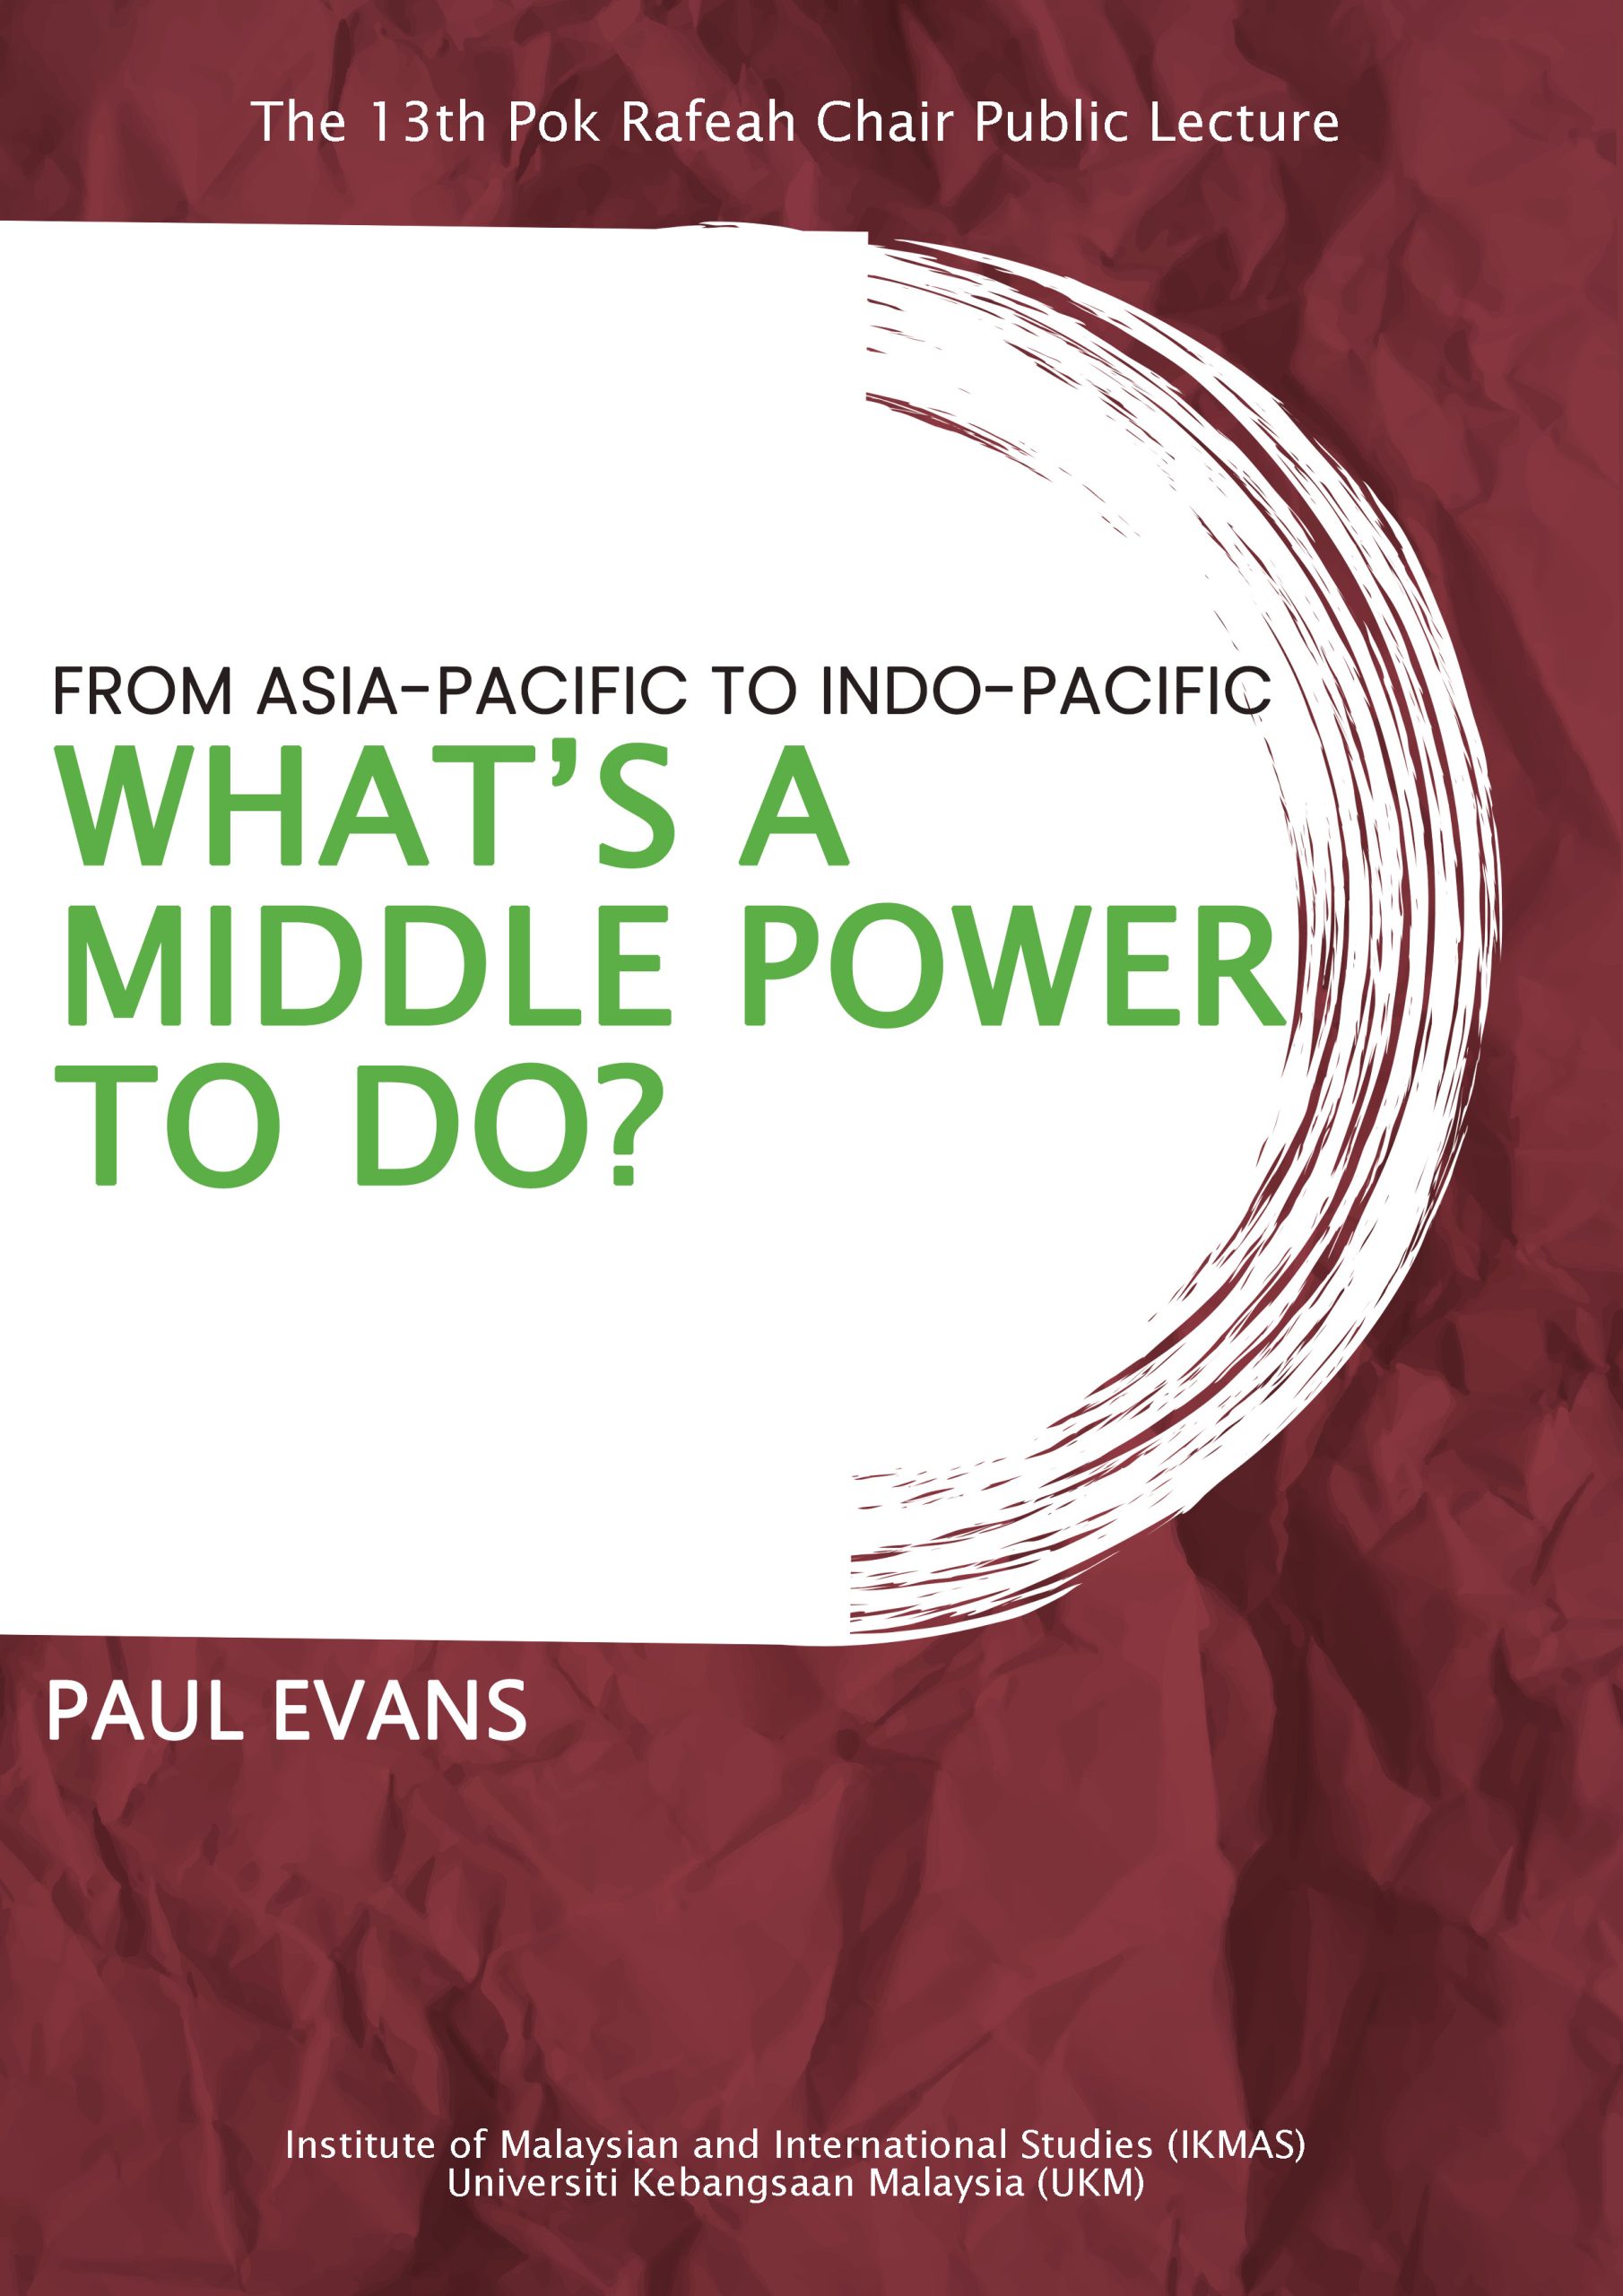 From Asia-Pacific to Indo-Pacific: What’s a Middle Power to Do?